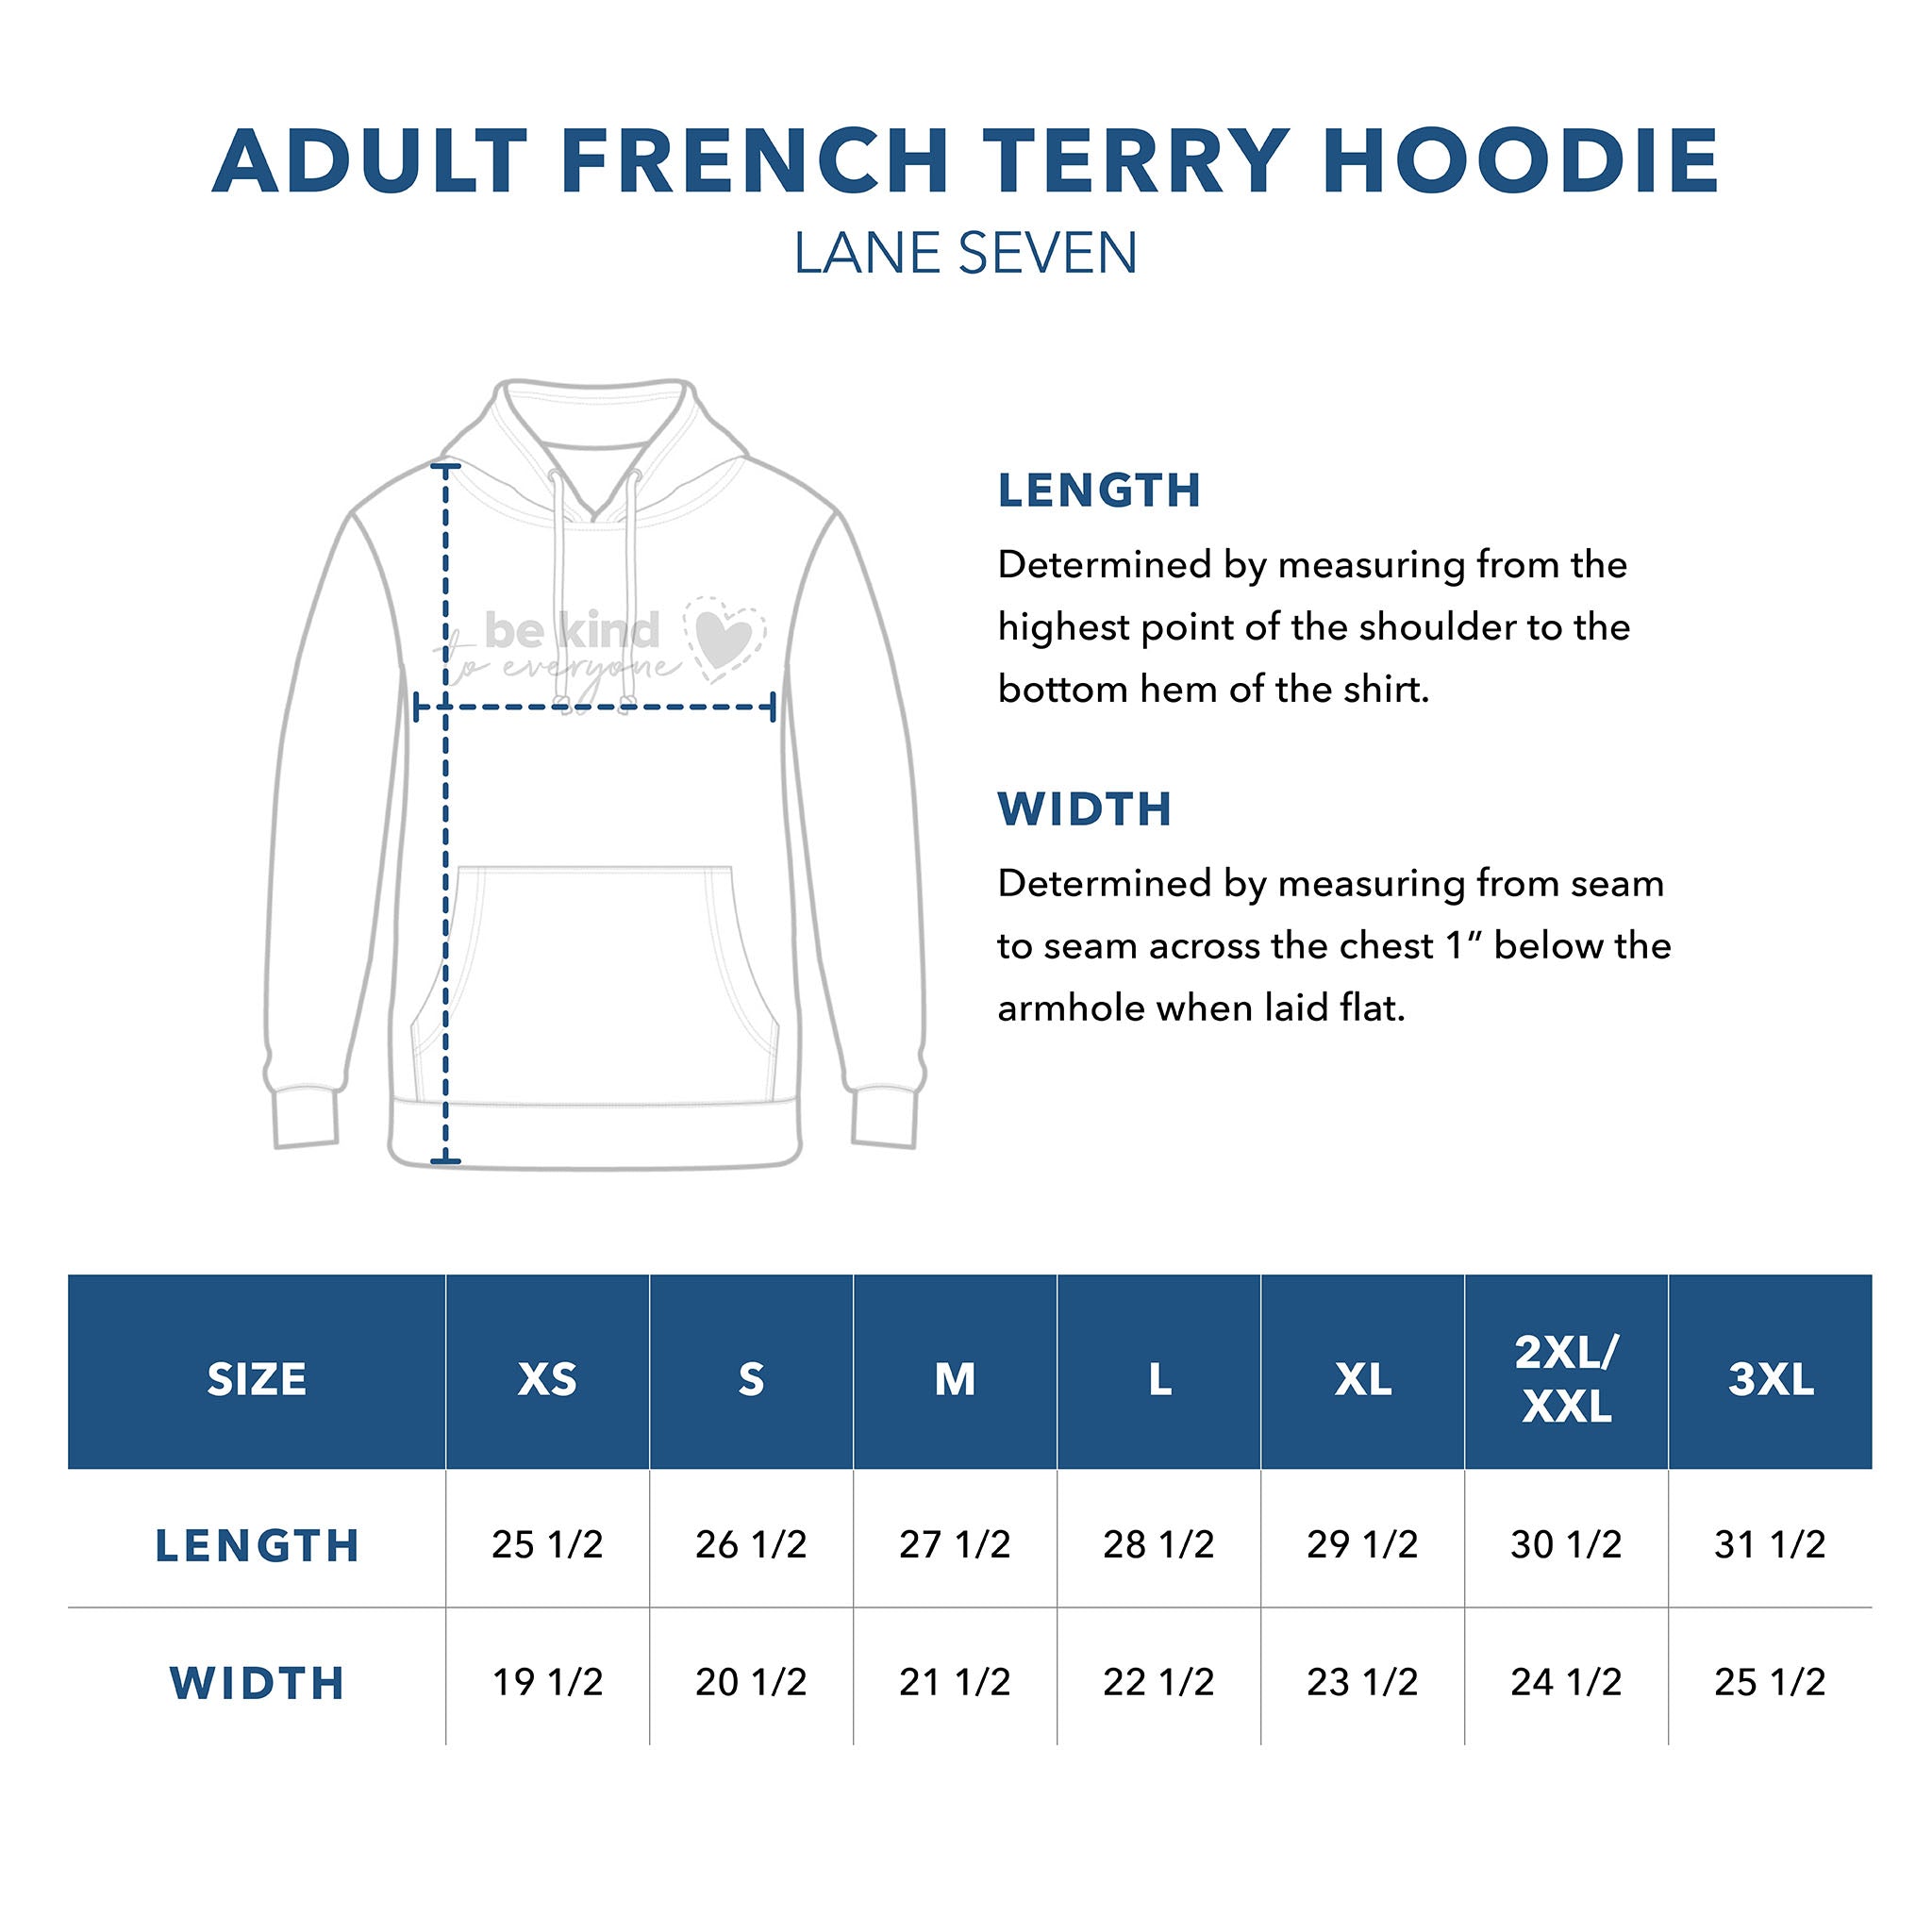 Adult Lane Seven French Terry Hoodie Sizing Guide